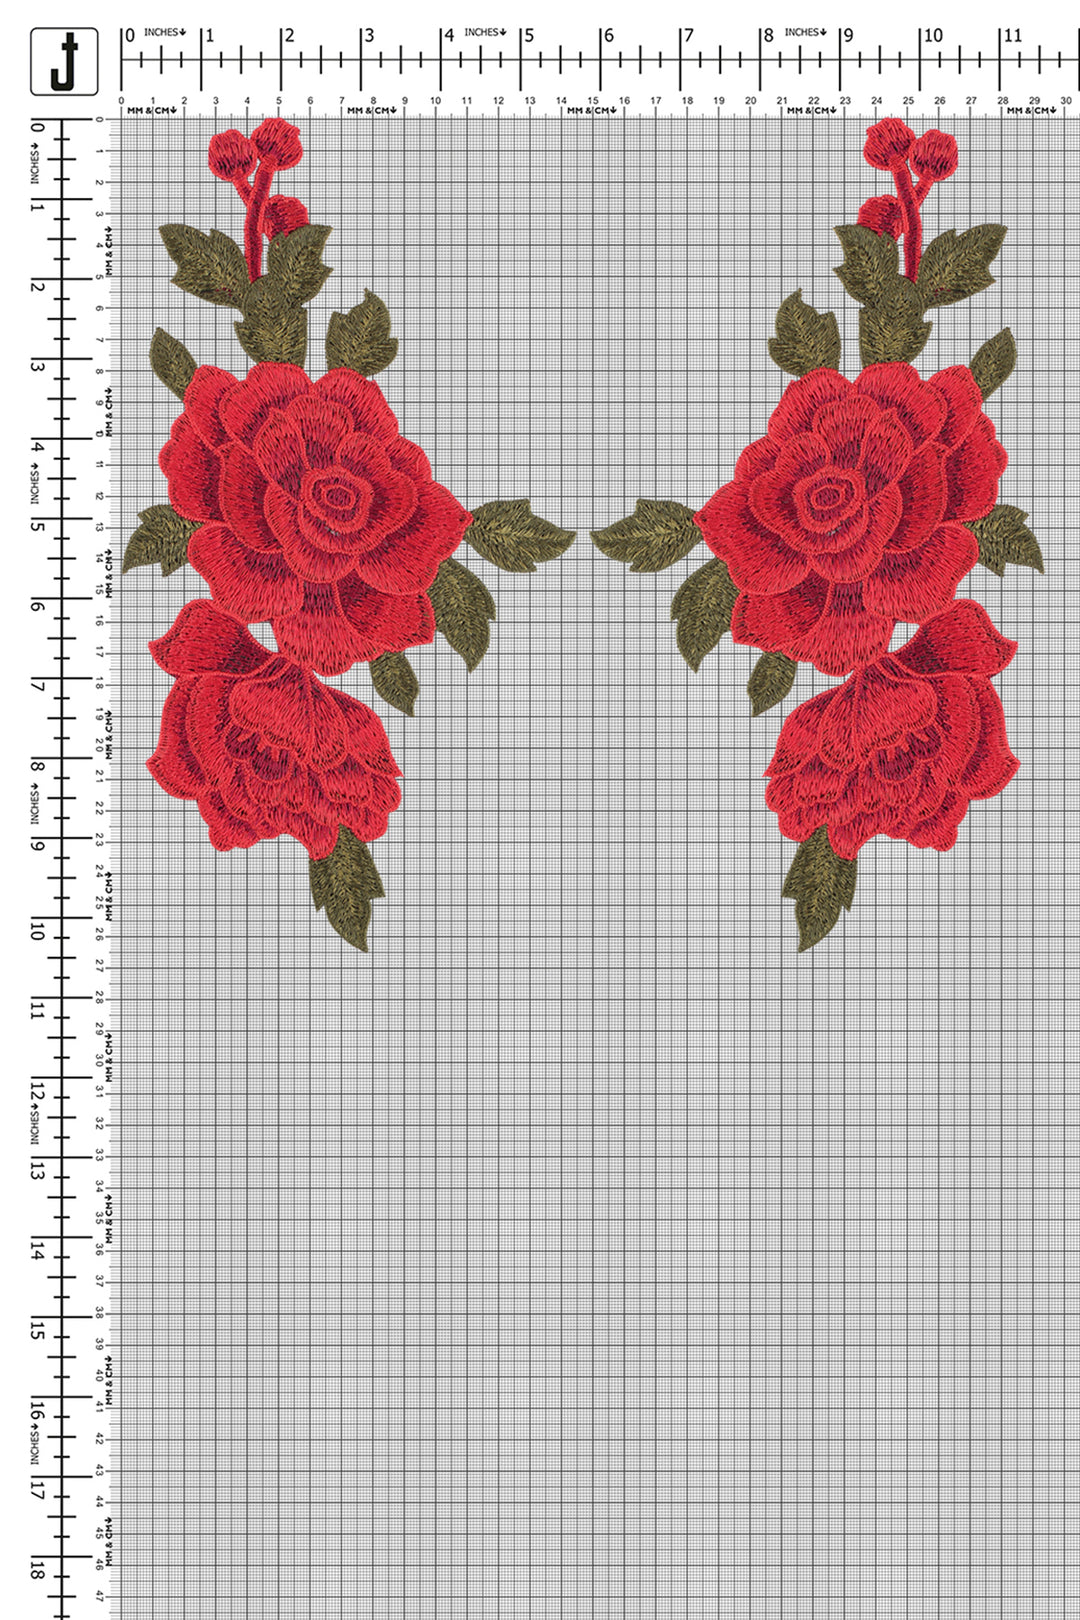 Pair of Sew on Red Flower Embroidery Patch